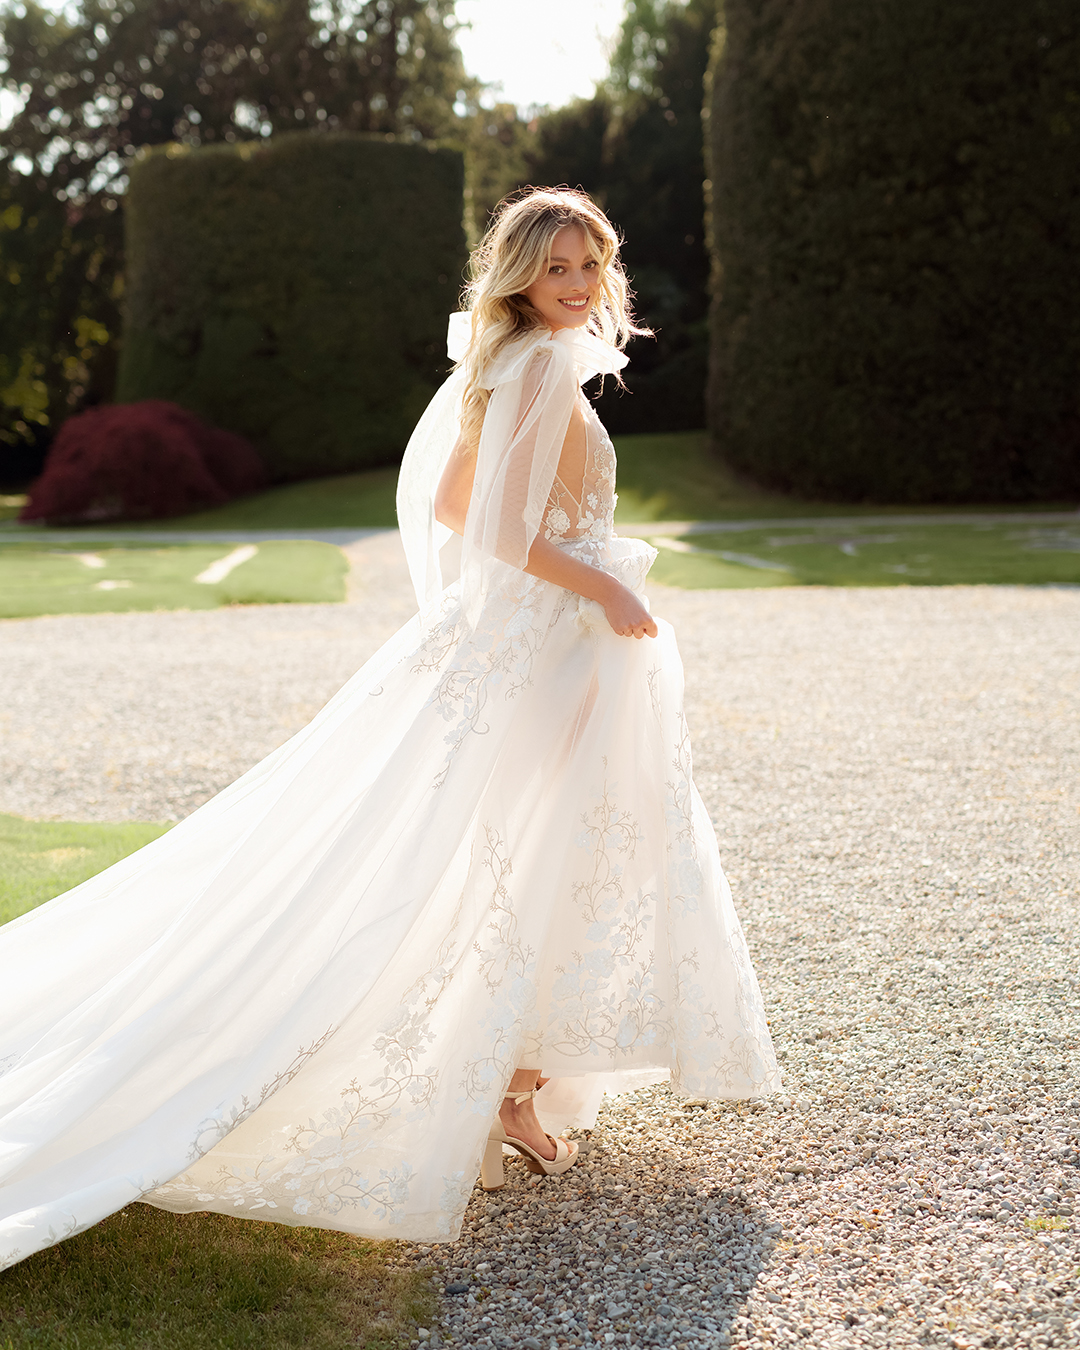 A bride runs in a Berta wedding dress that has bow tie sleeves and embellished flowers.